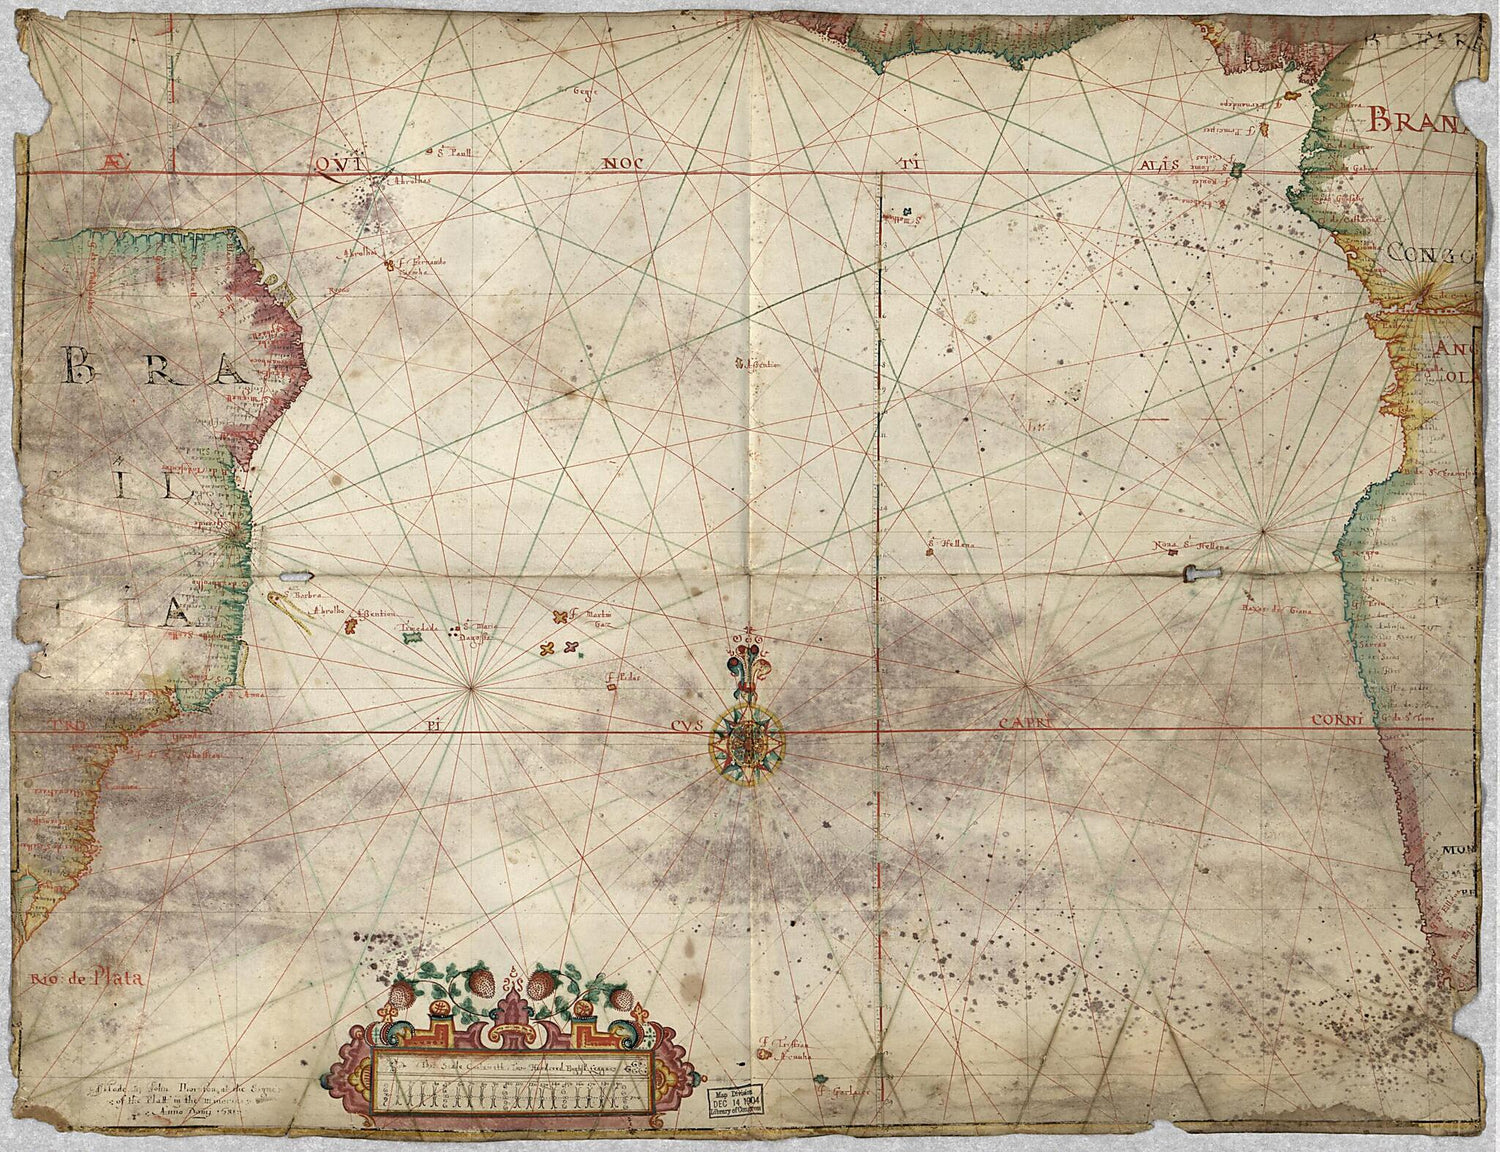 This old map of Chart of the South Atlantic Ocean With the Coasts of Brazil and West Africa from 1681 was created by John Thornton in 1681